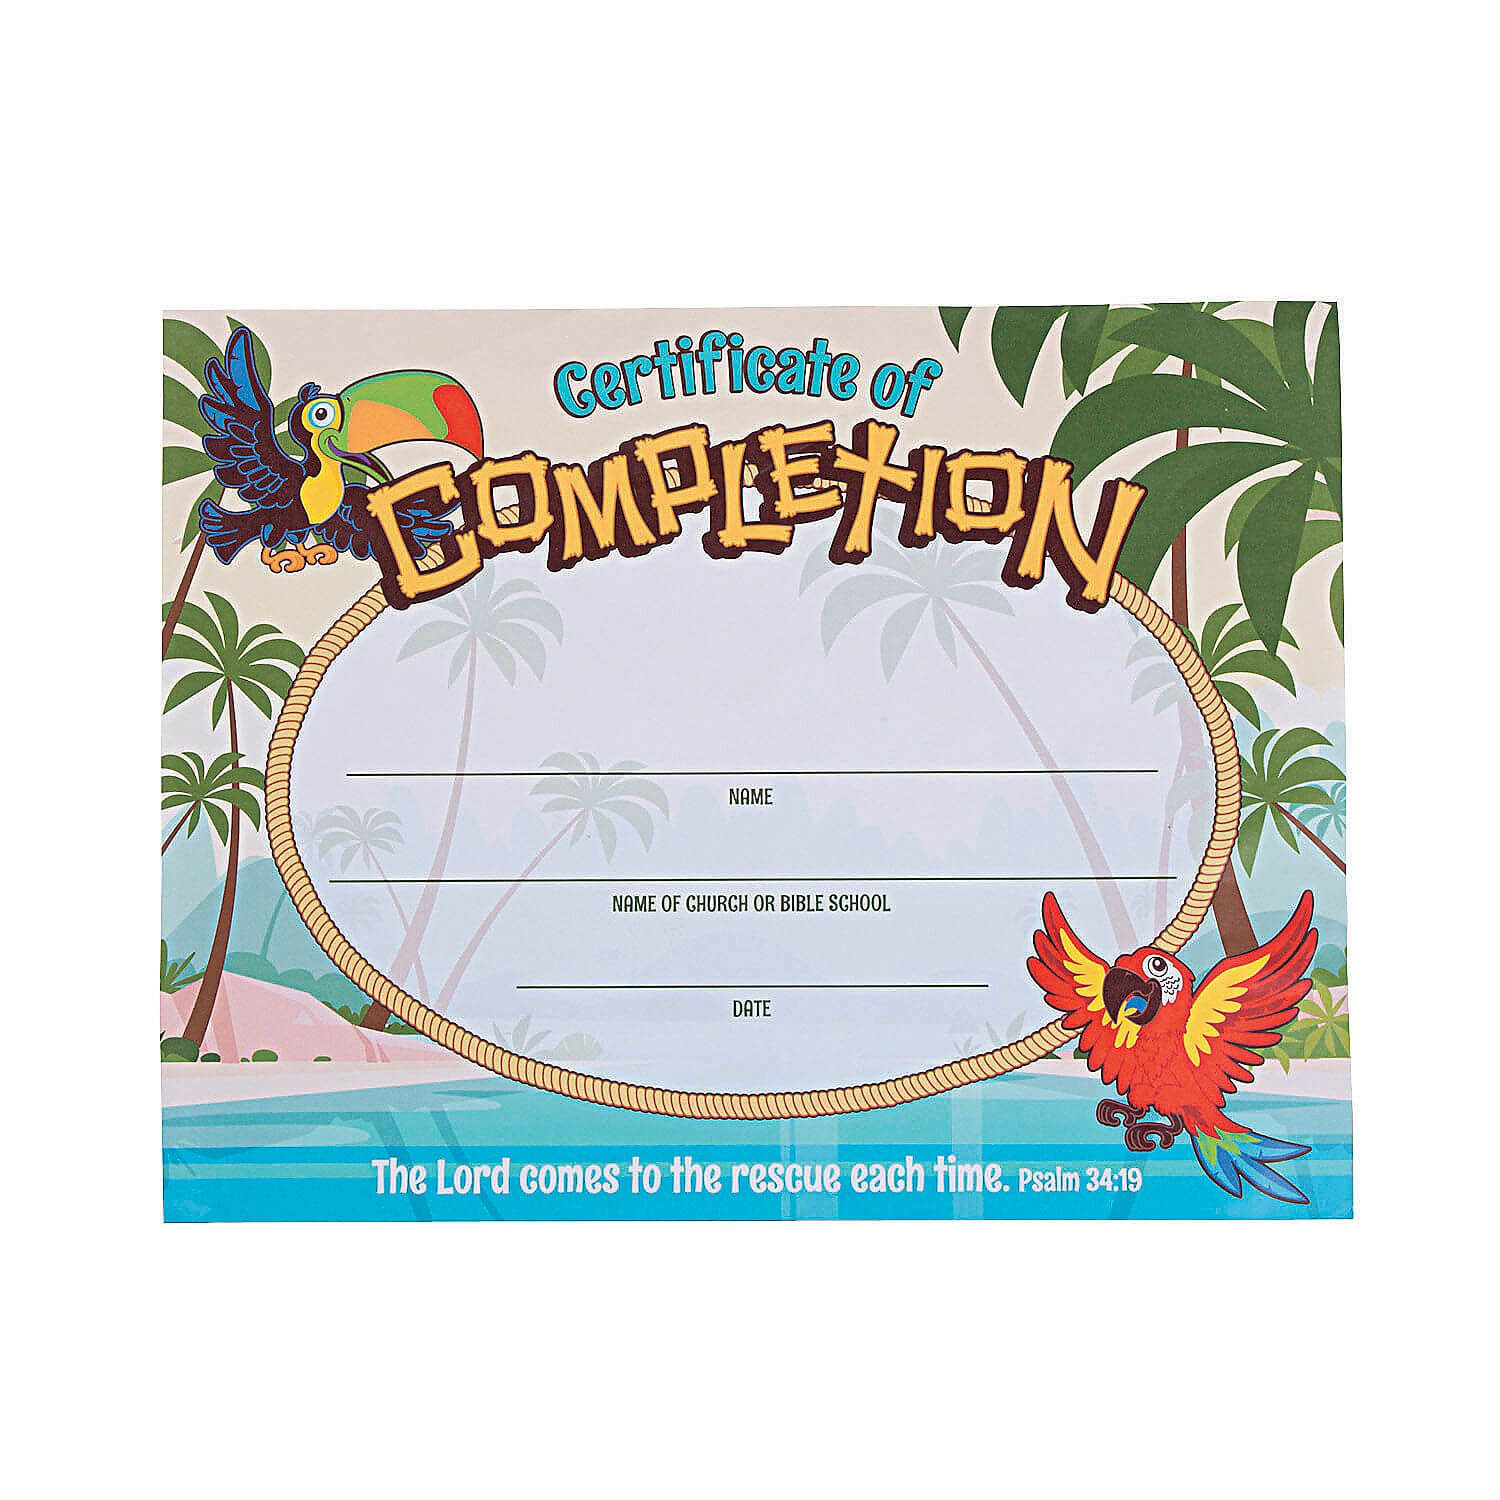 Island Vbs Certificates Of Completion | Certificate Pertaining To Free Vbs Certificate Templates